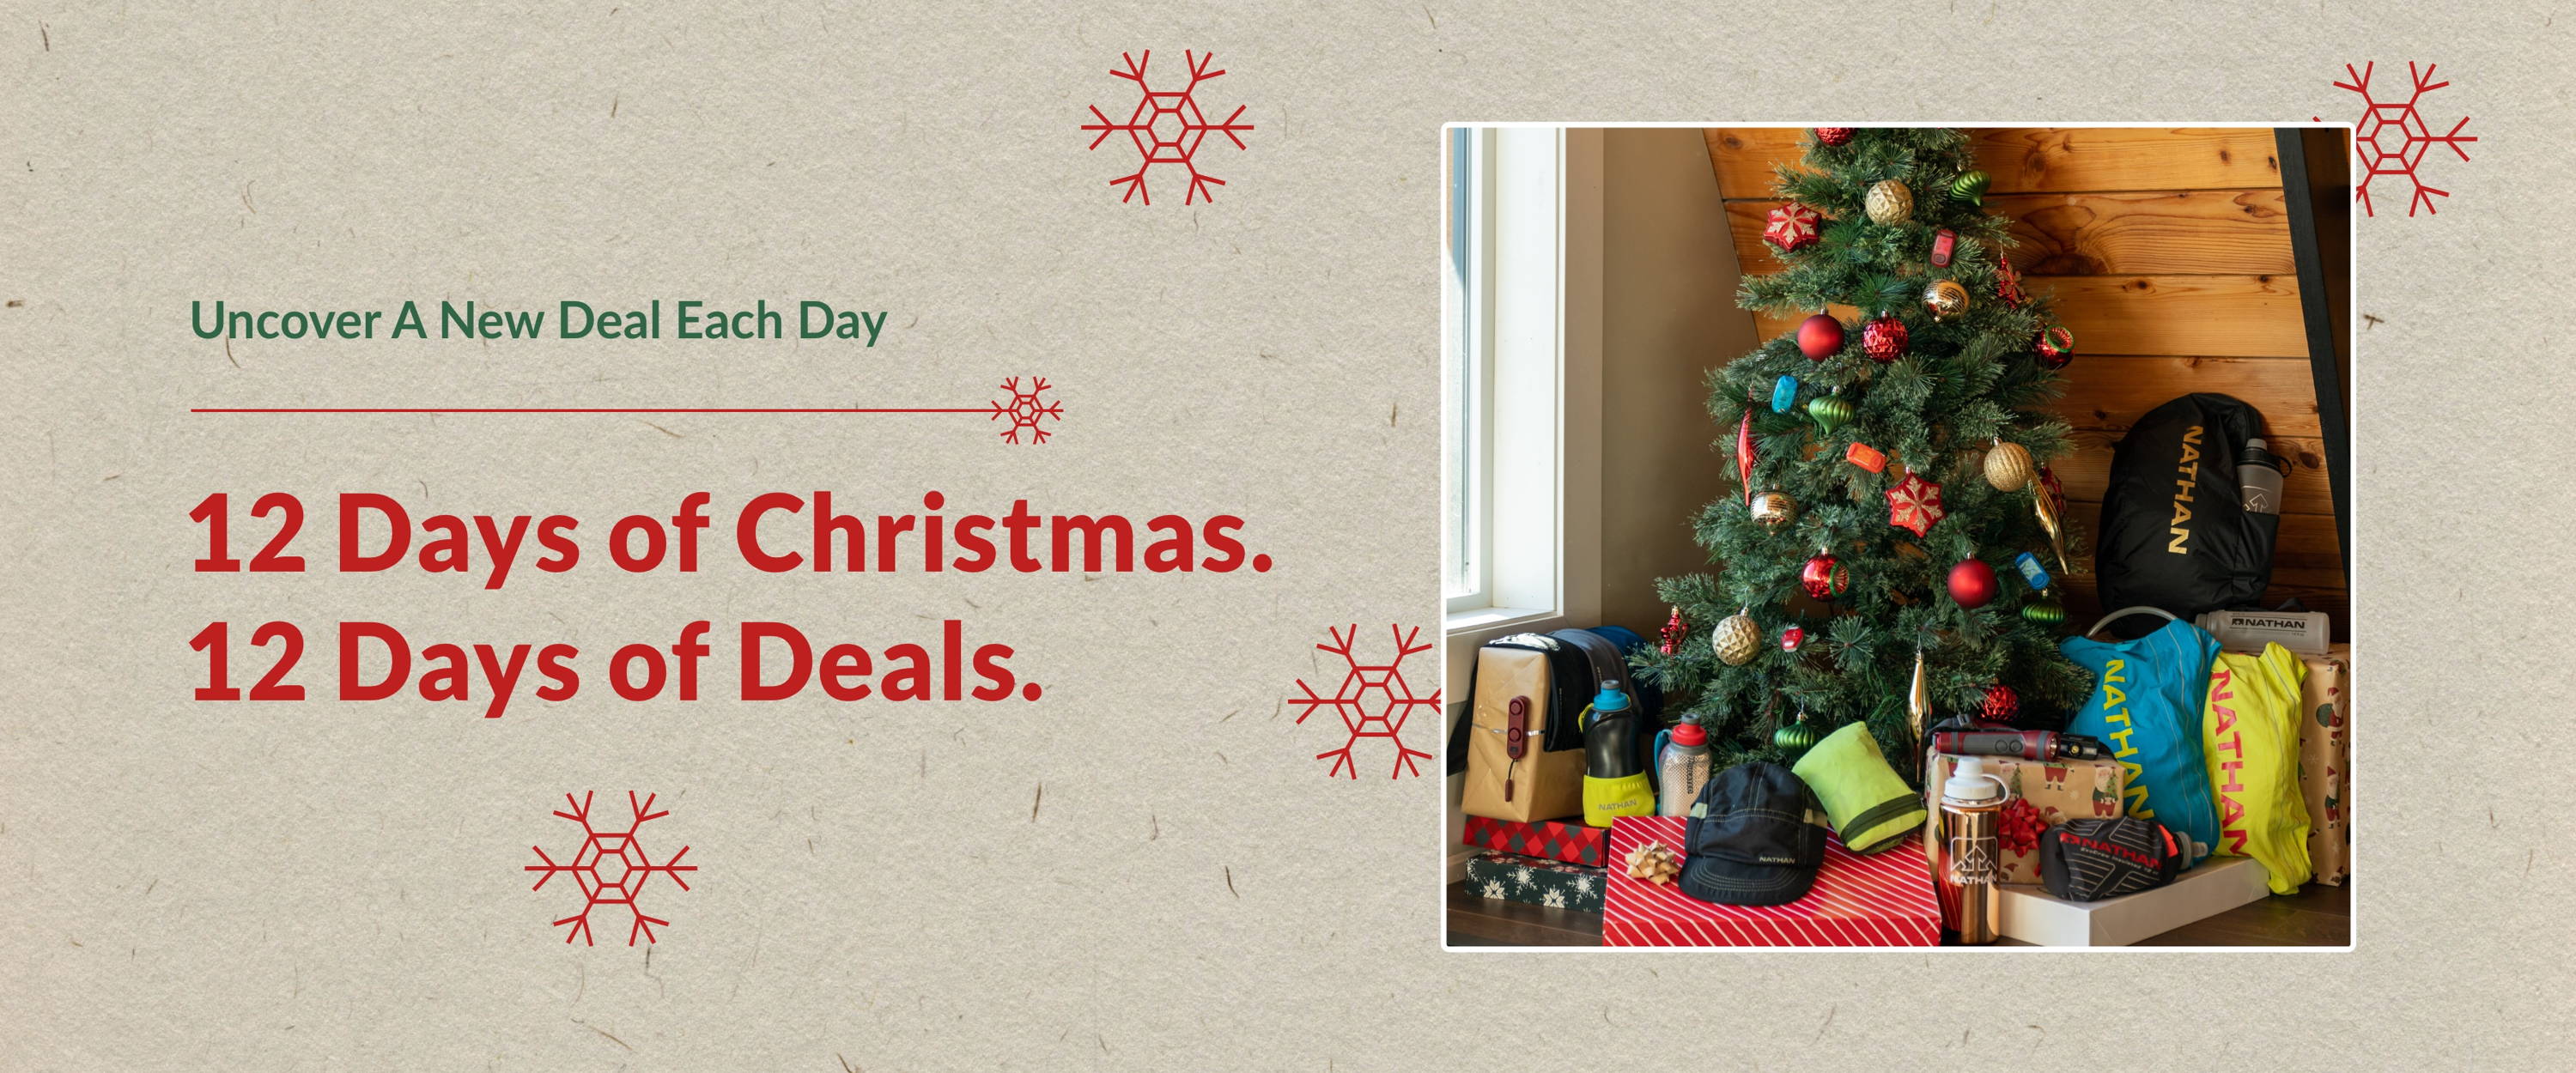 Uncover a new deal each day. 12. days of Christmas. 12 days of deals.